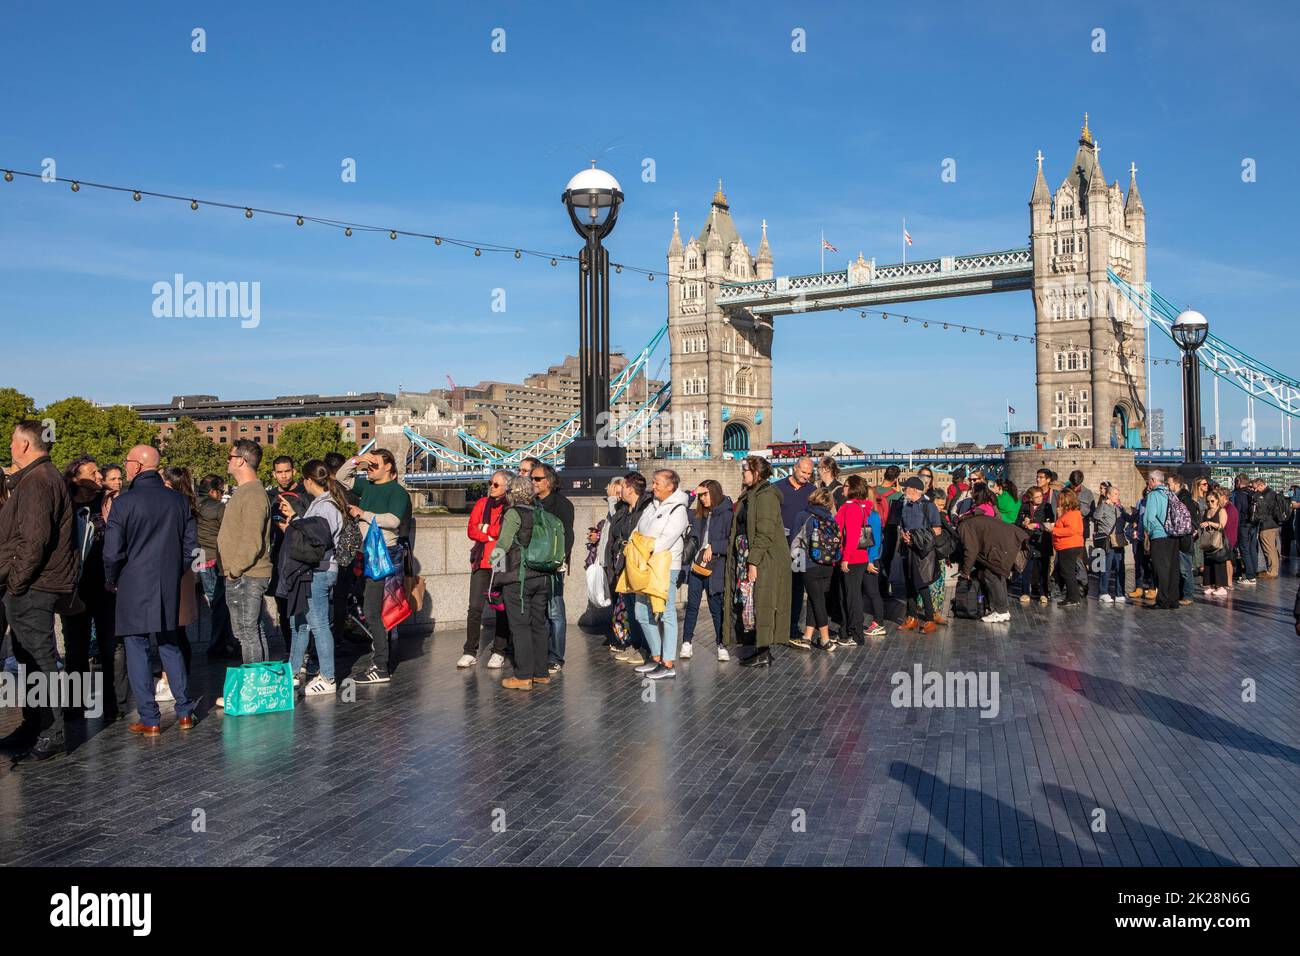 London, UK - September17th 2022: The Lying-in-State queue to see Queen Elizabeth II, passing the iconic Tower Bridge in London, UK. Stock Photo